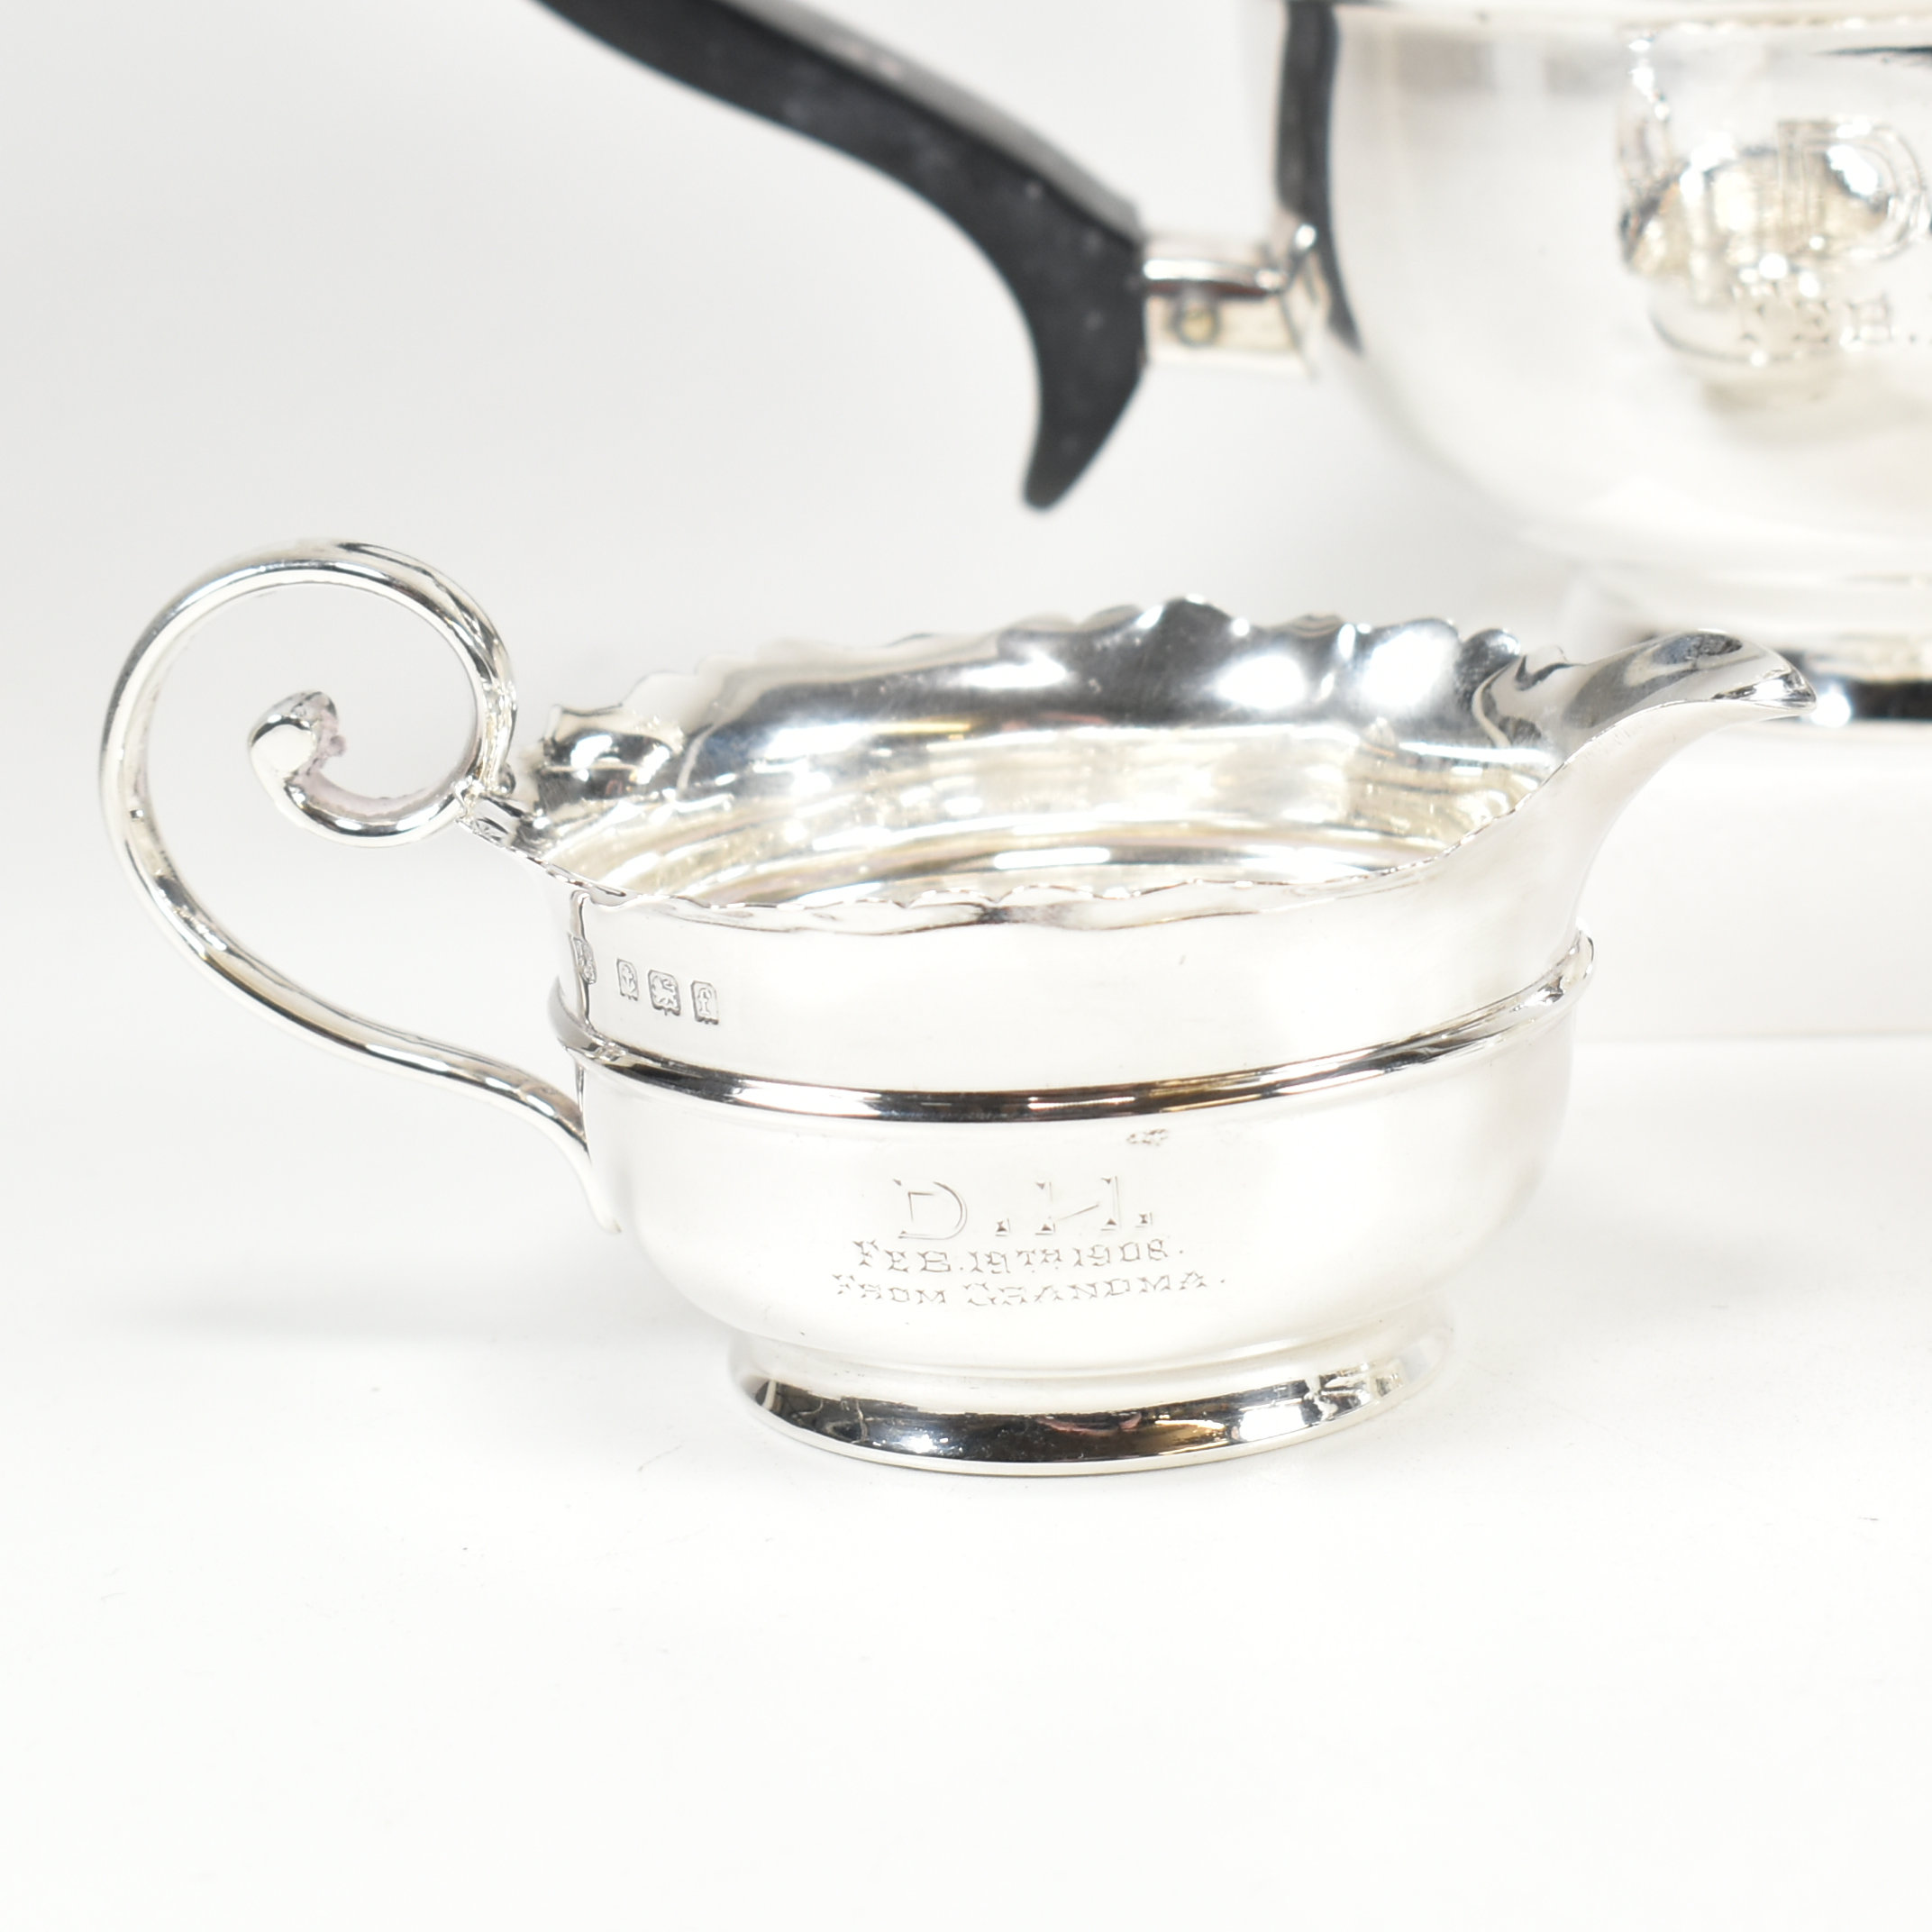 EARLY 20TH CENTURY HALLMARKED SILVER TEA SERVICE - Image 2 of 9